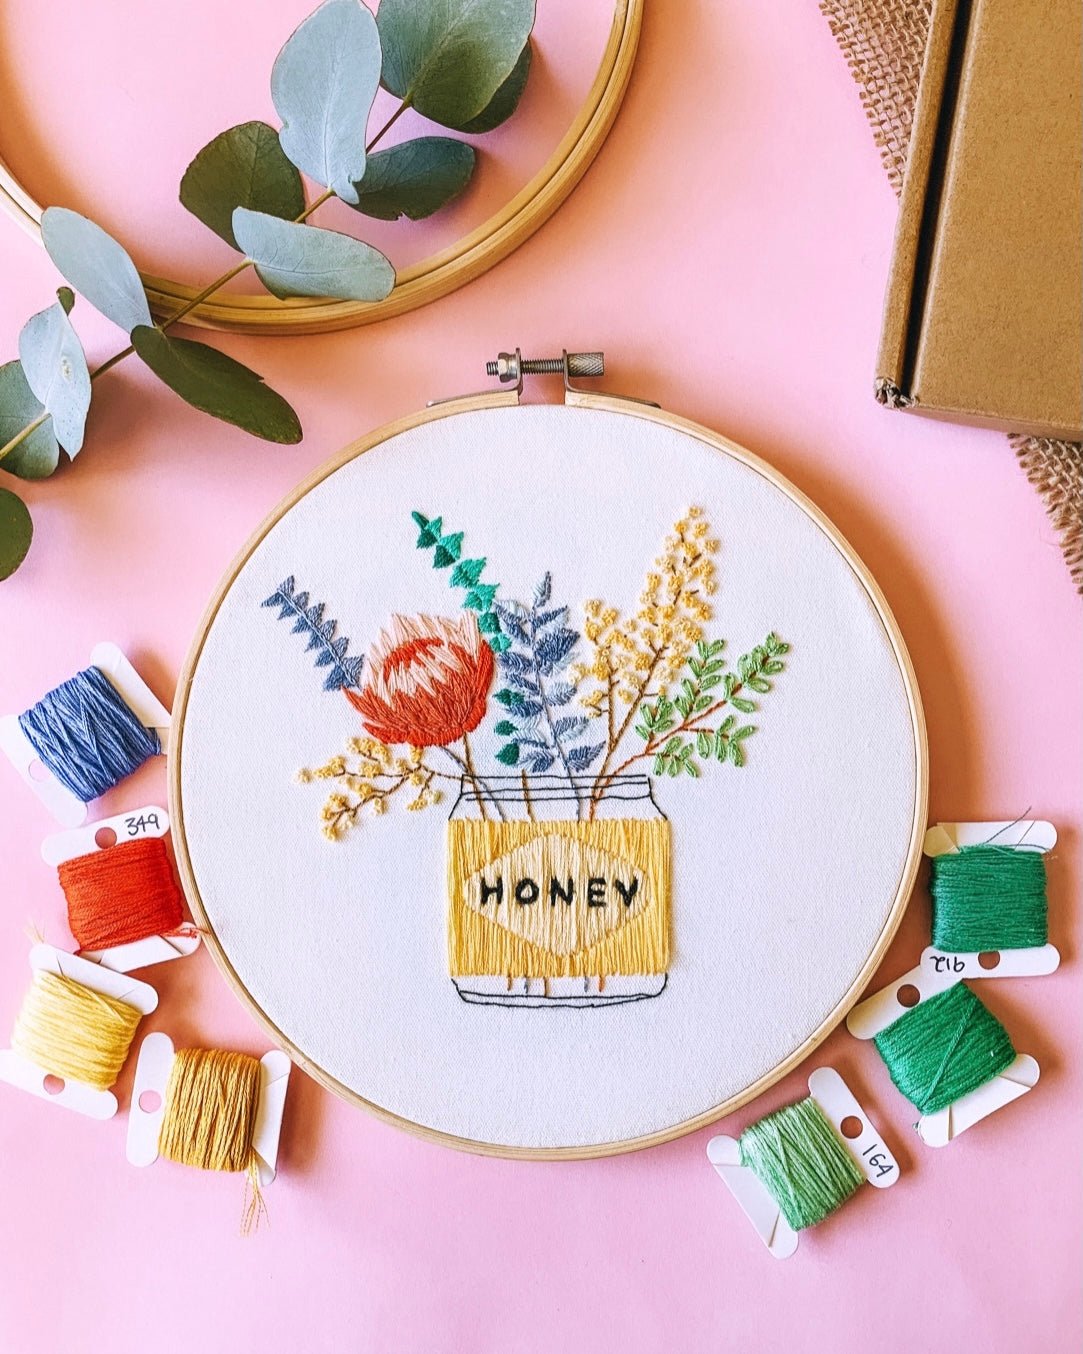 Finished embroidery piece of yellow honey jar with australian natives sitting in it including wattle and gum leaves, sitting on a pink background